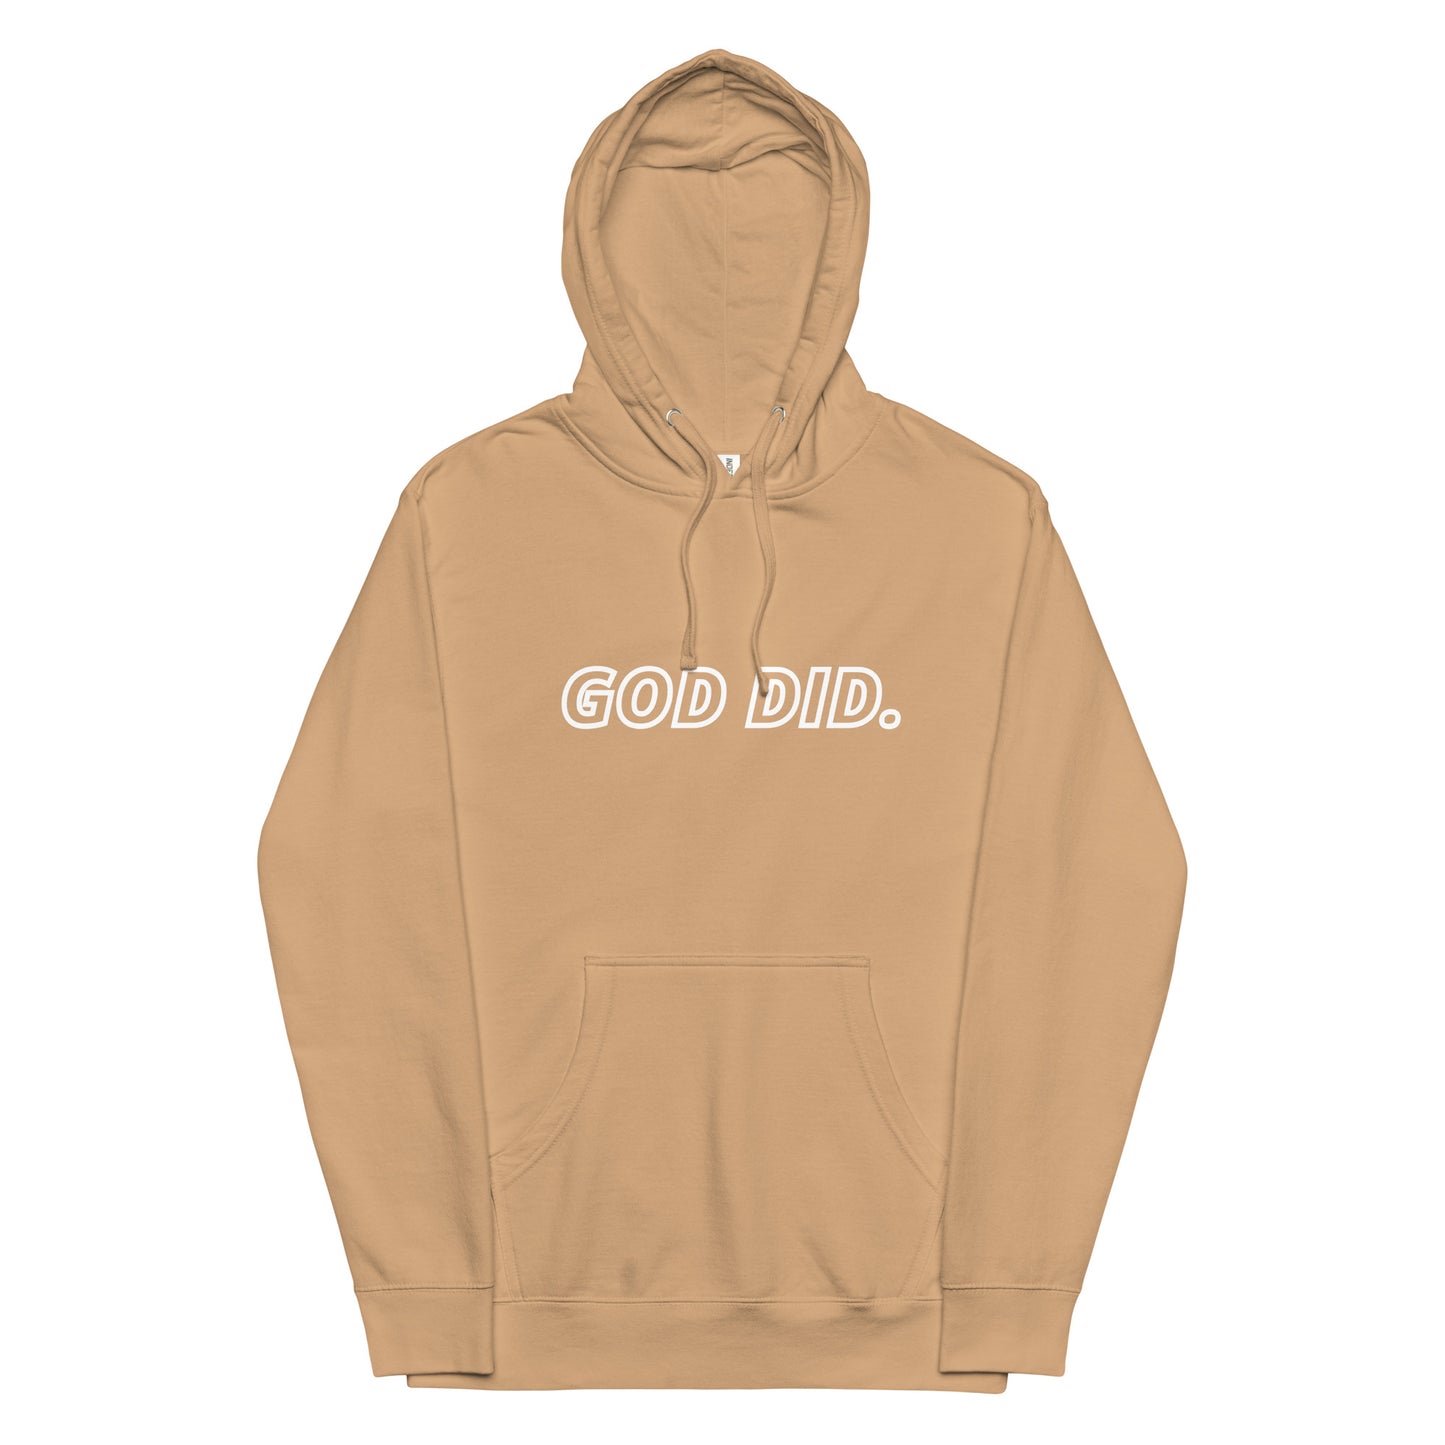 God DID - Unisex midweight hoodie